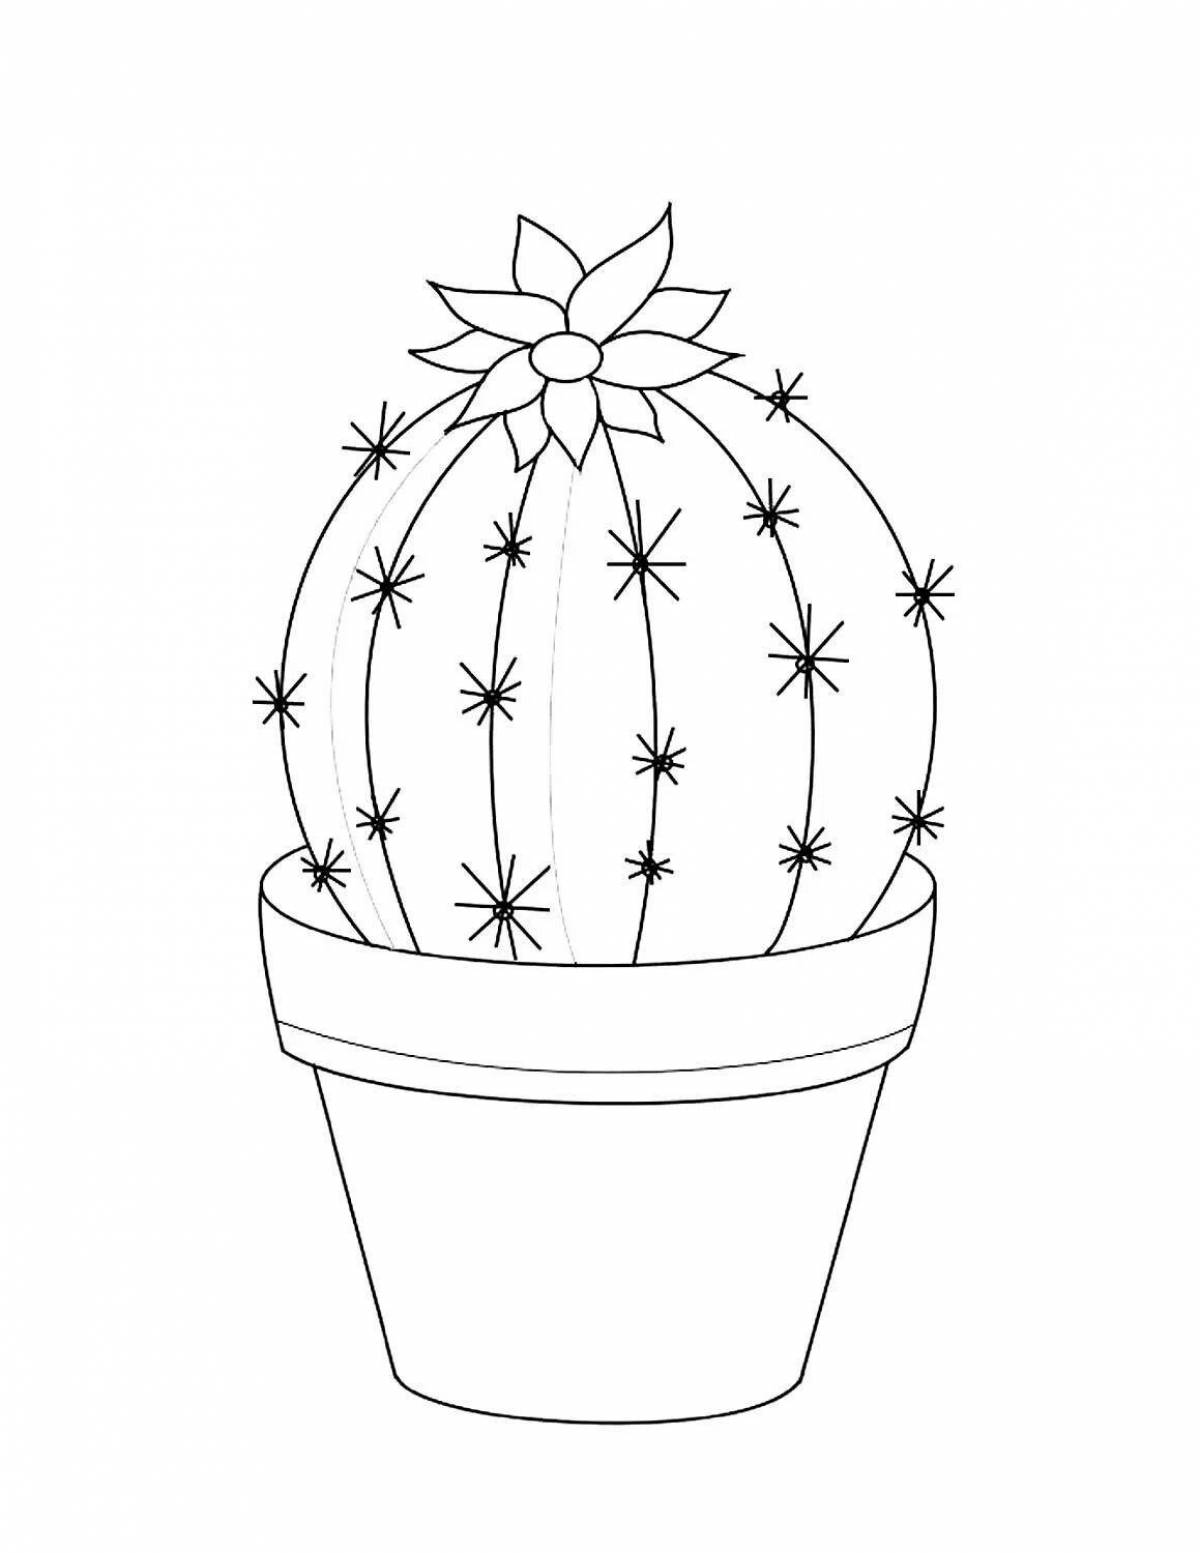 Potted cactus #16